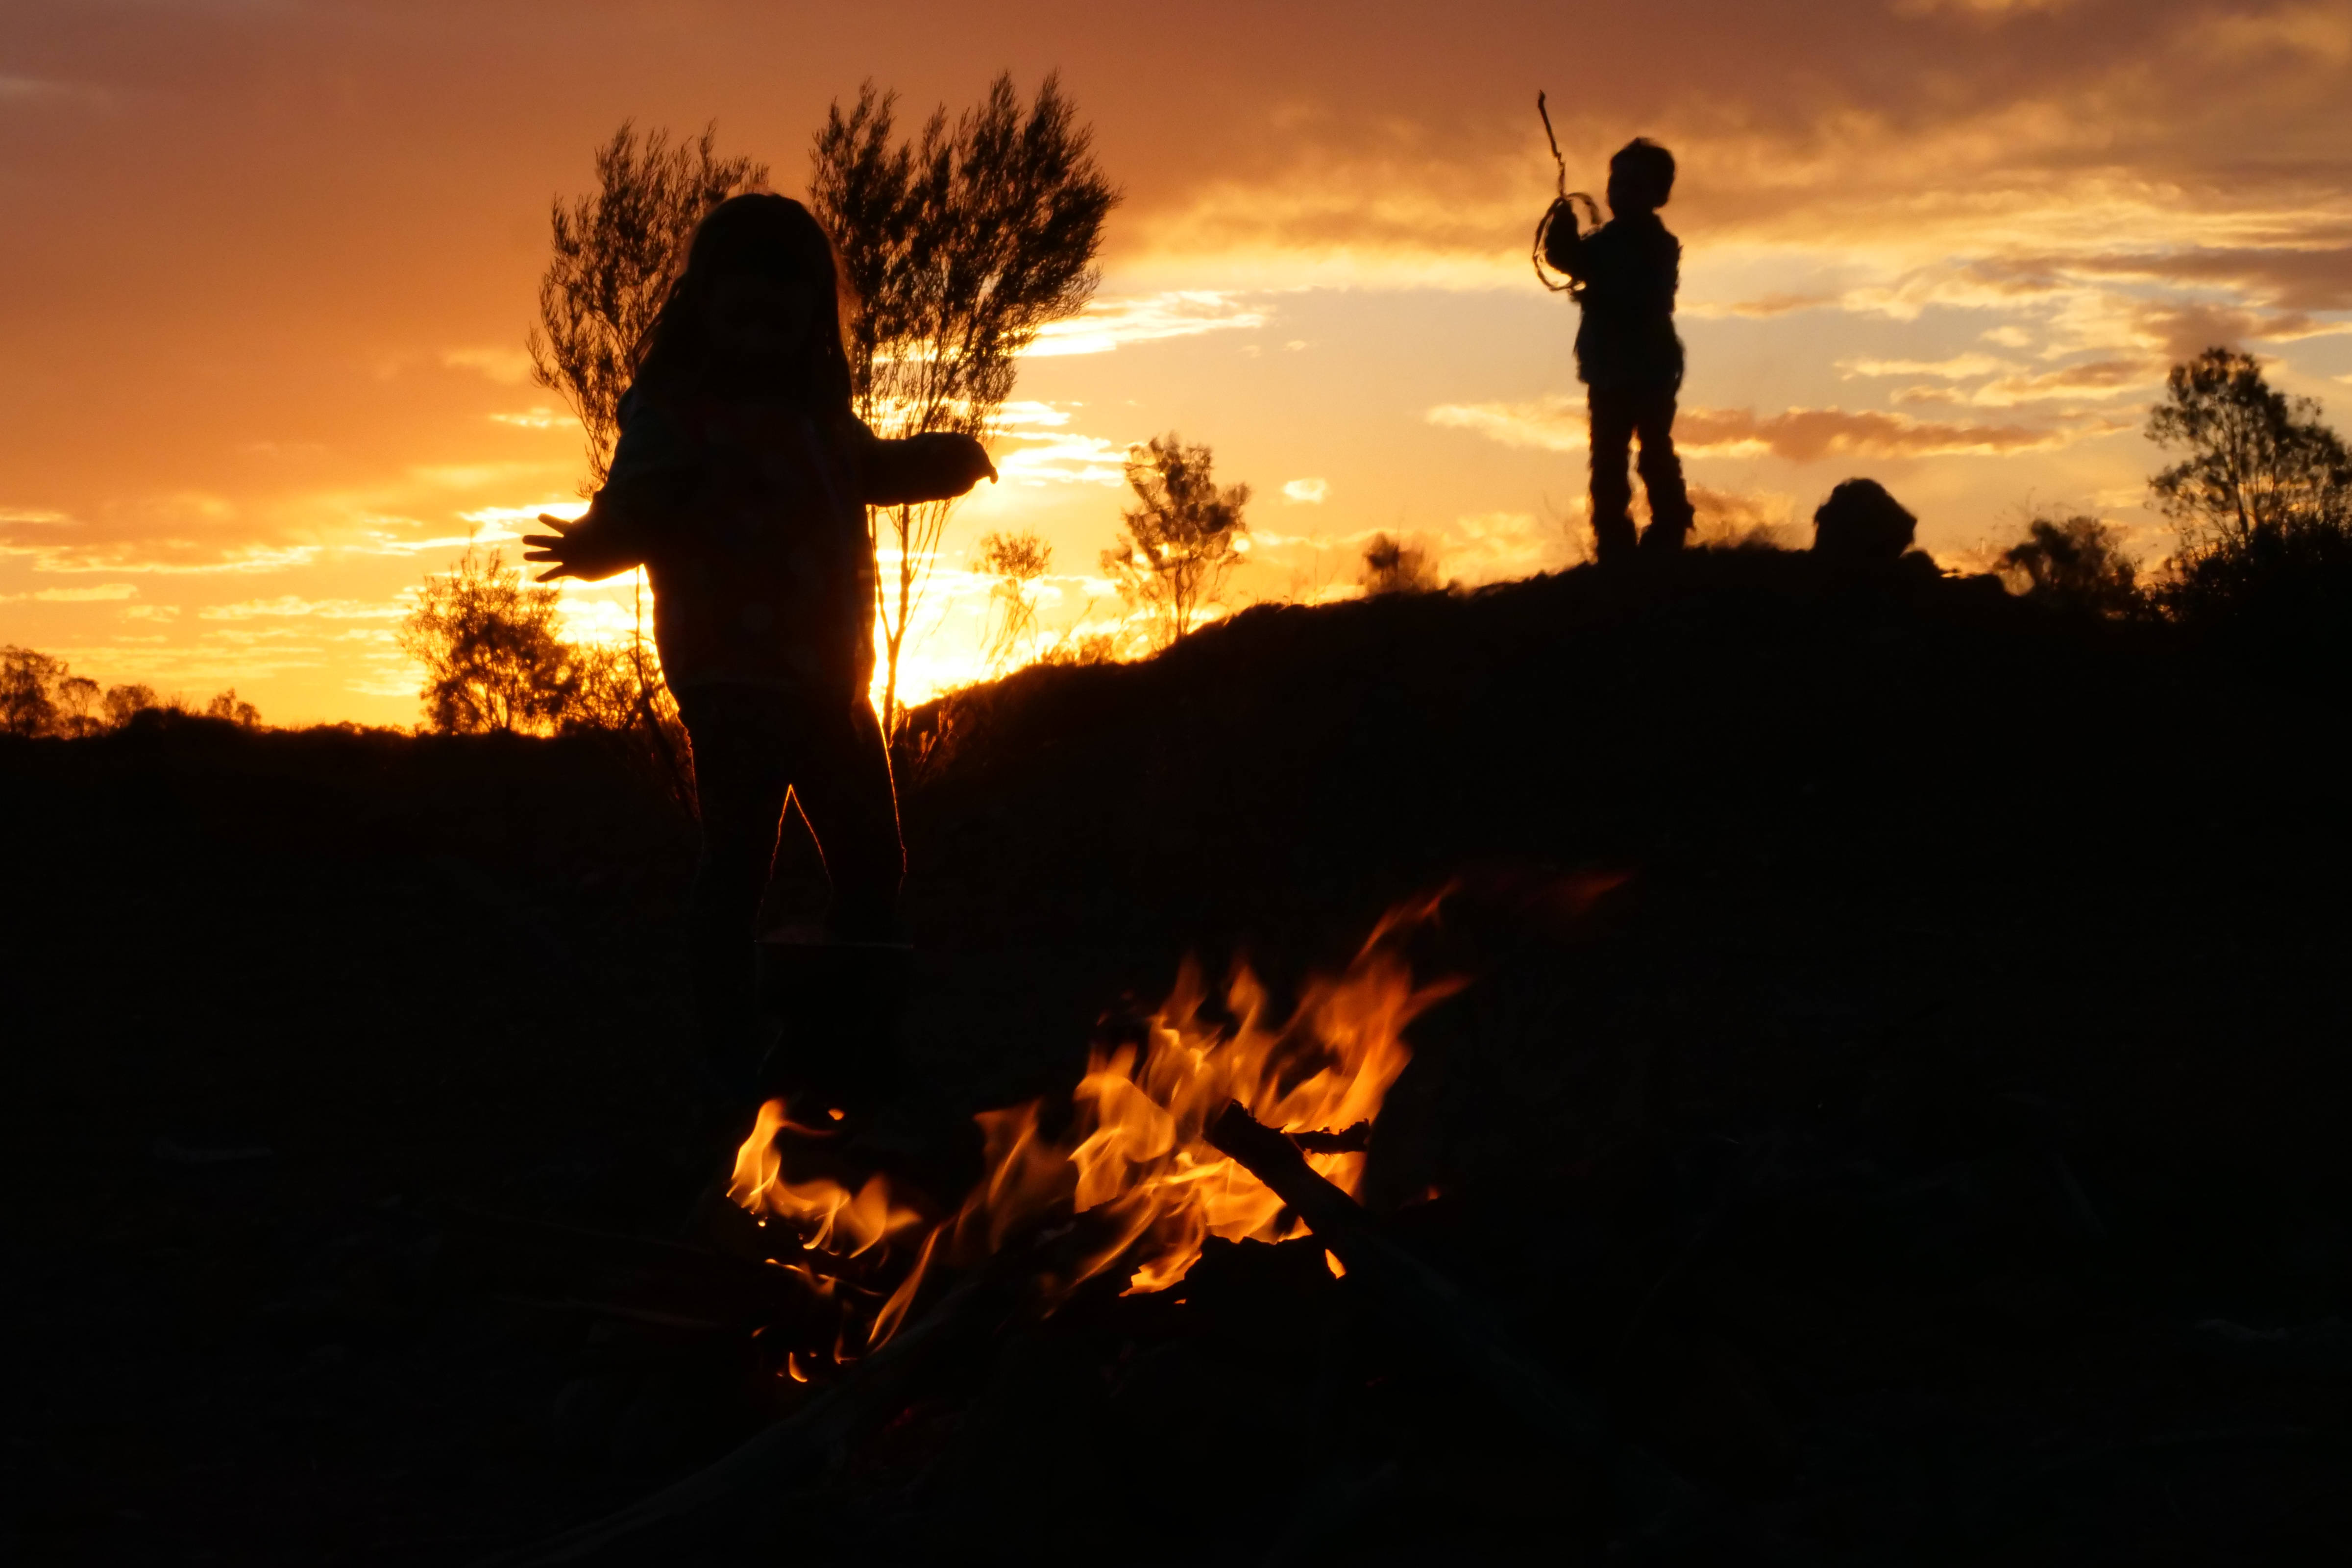 Silhouette of girl and boy with fire in foreground and sunset in background.